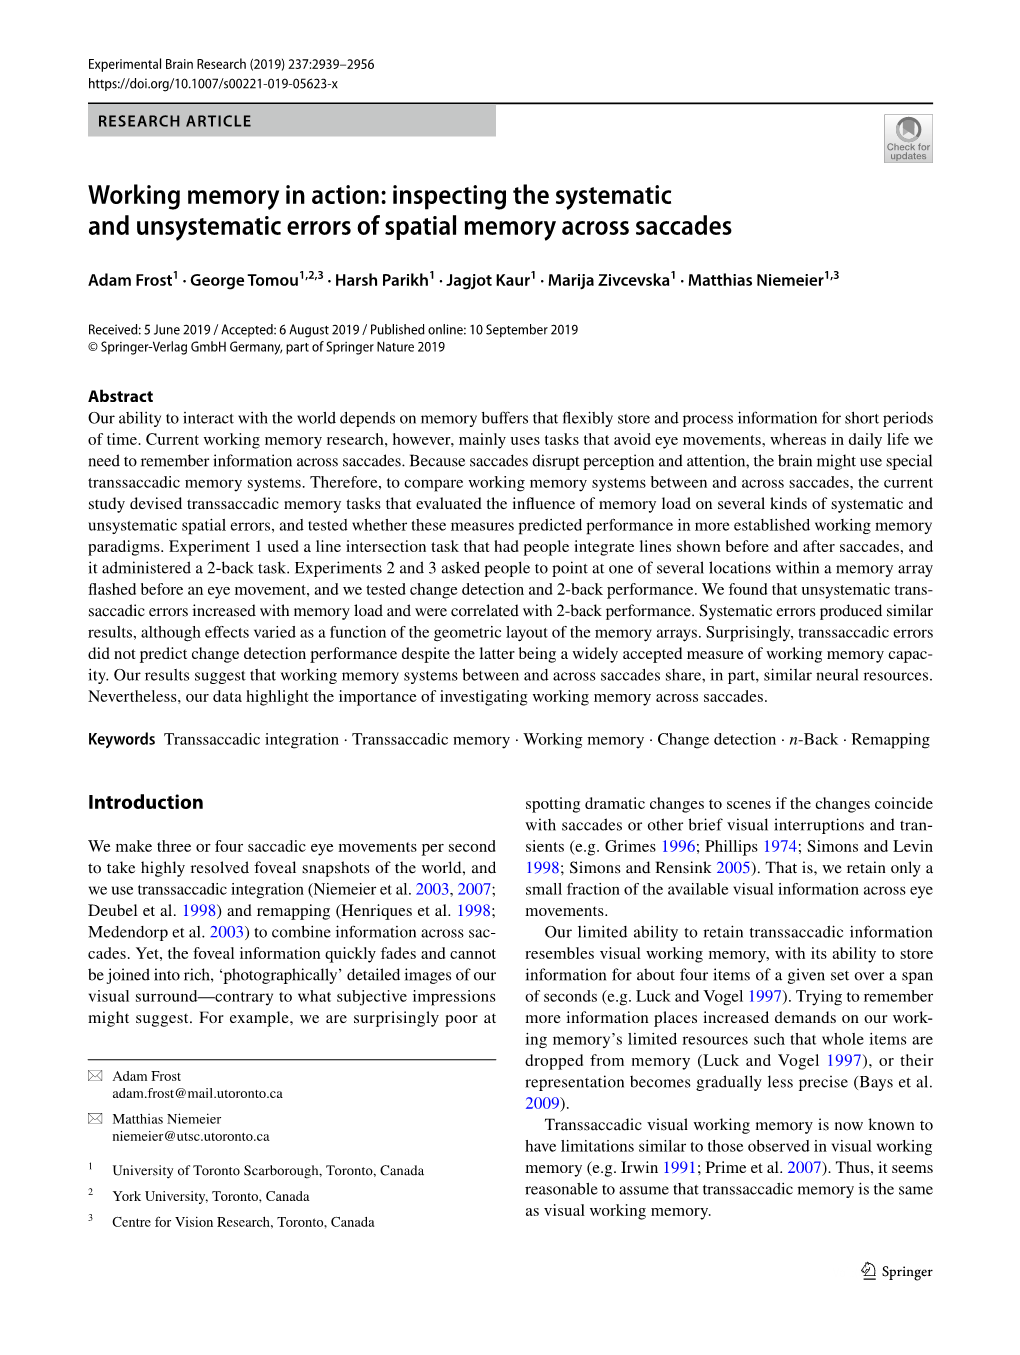 Inspecting the Systematic and Unsystematic Errors of Spatial Memory Across Saccades